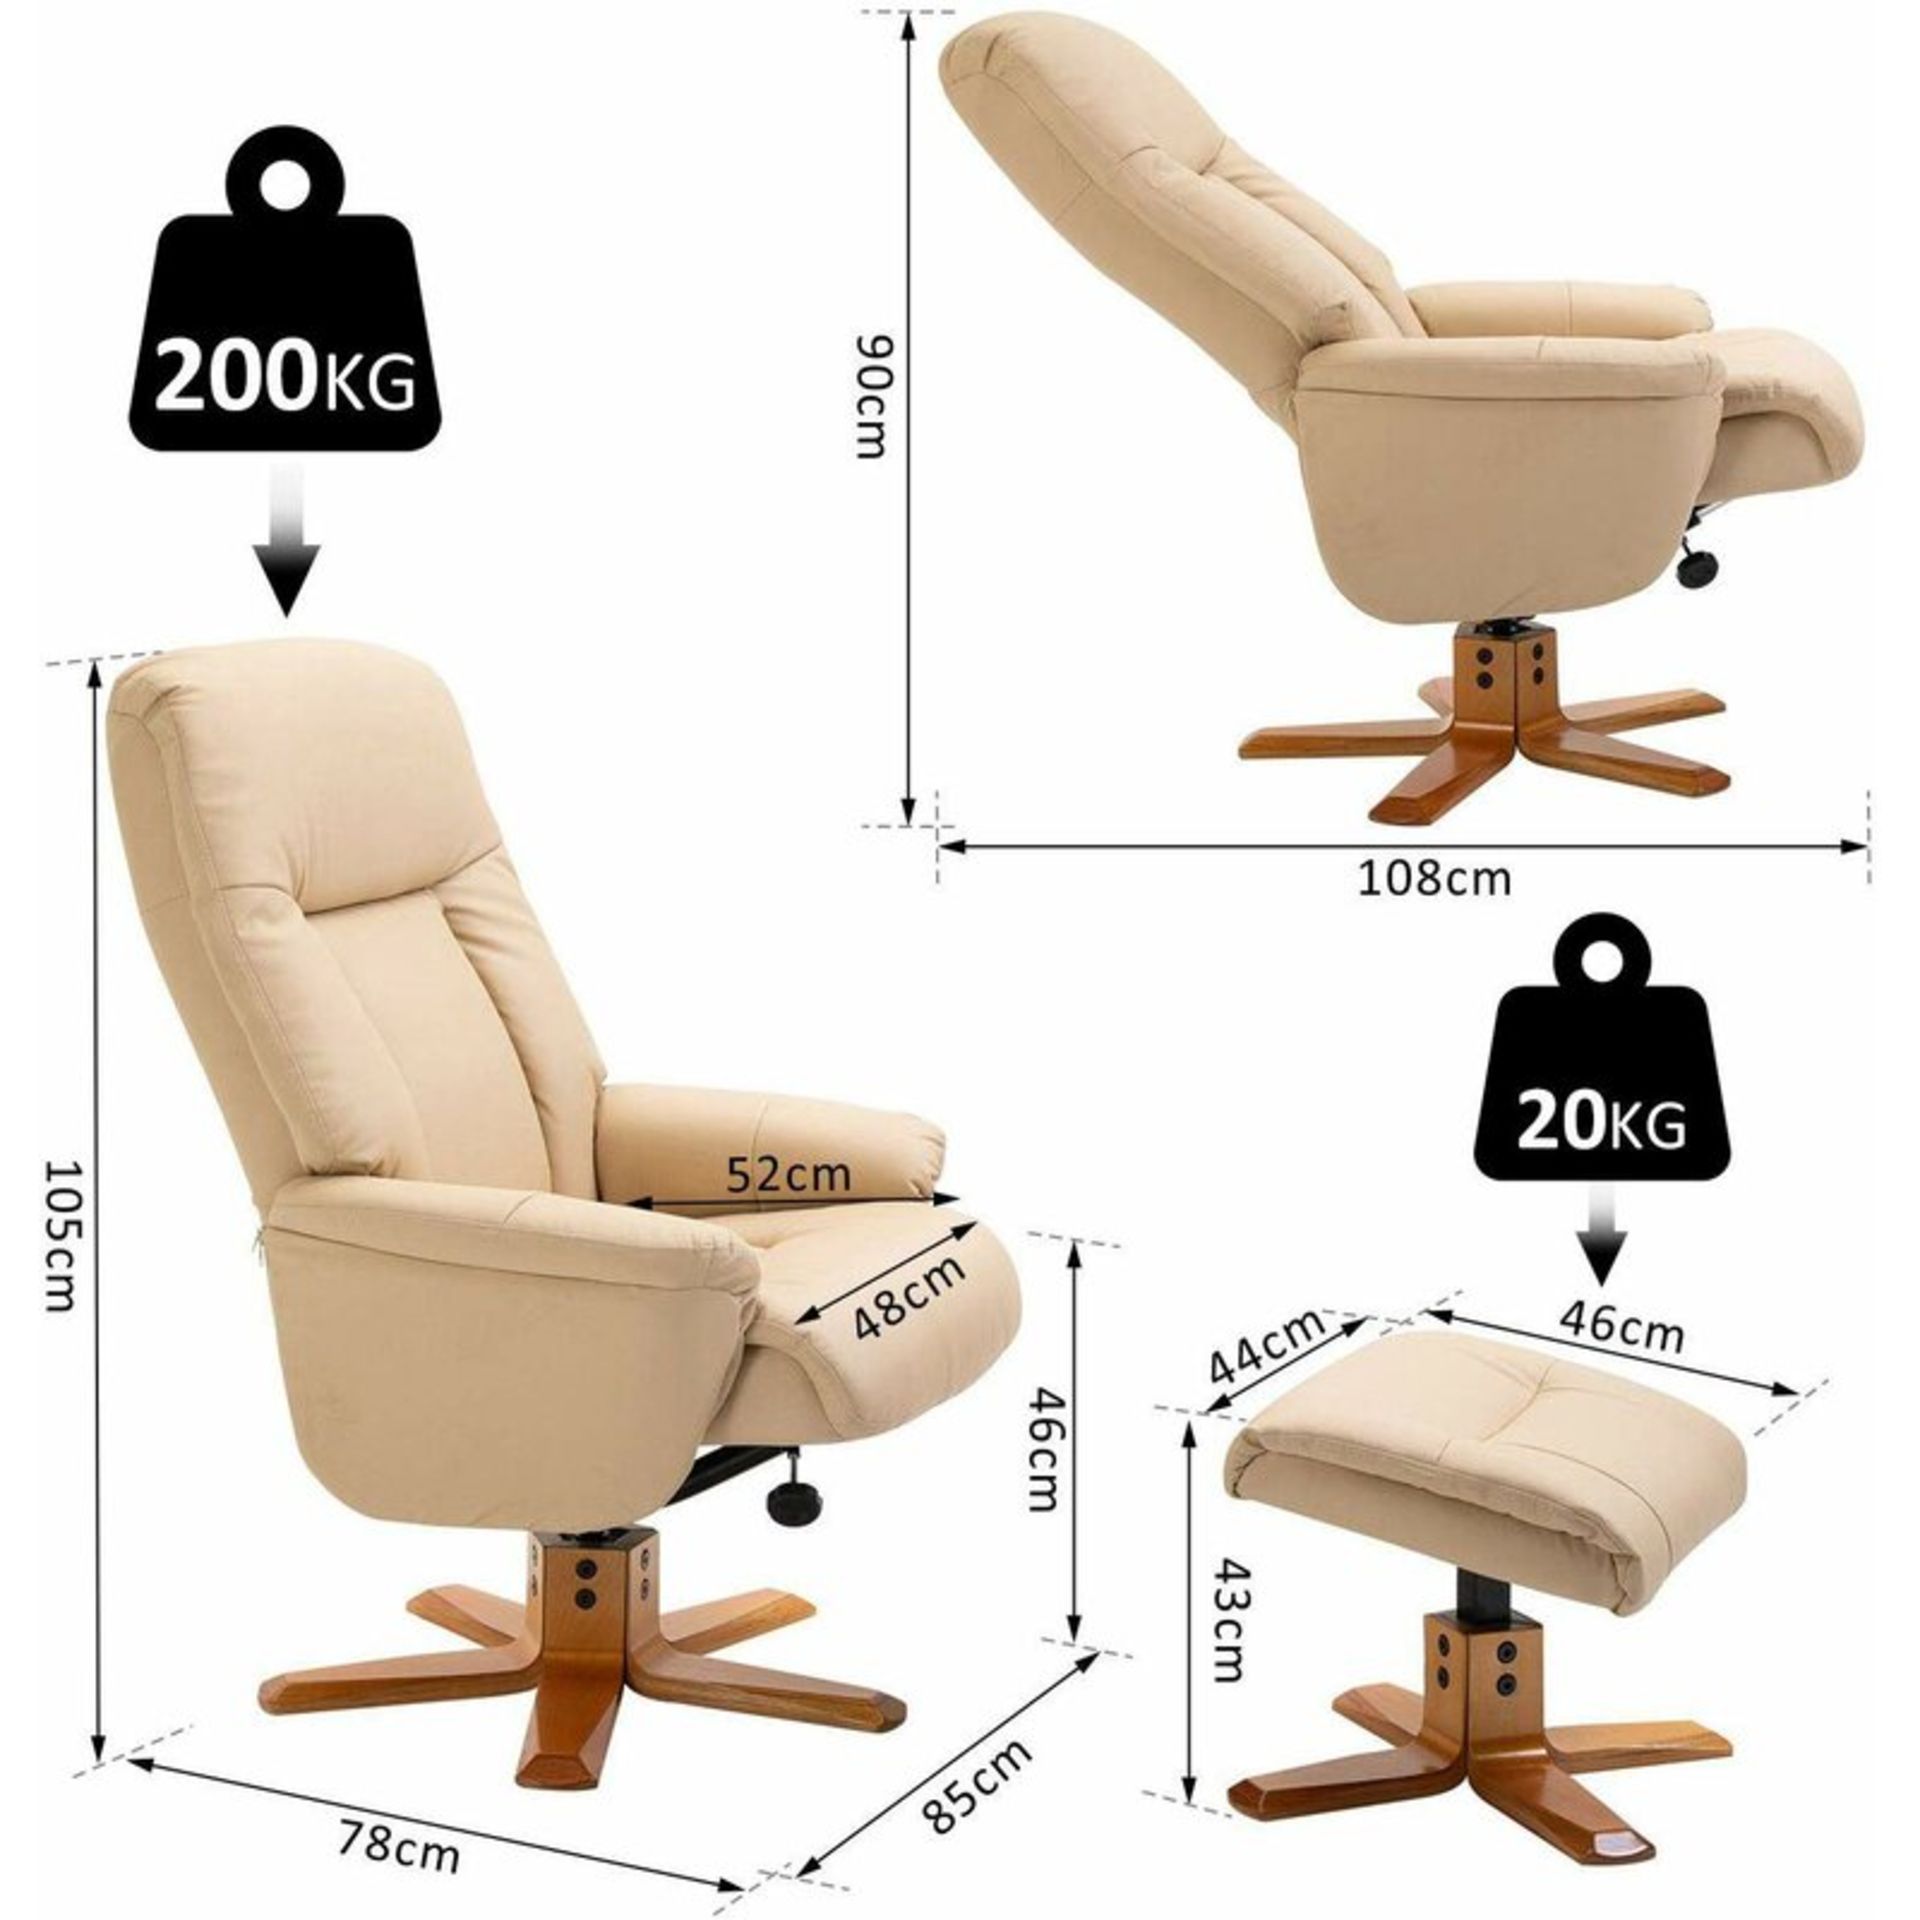 Hartzog Manual Recliner with Footstool - RRP £250.99 - Image 2 of 2